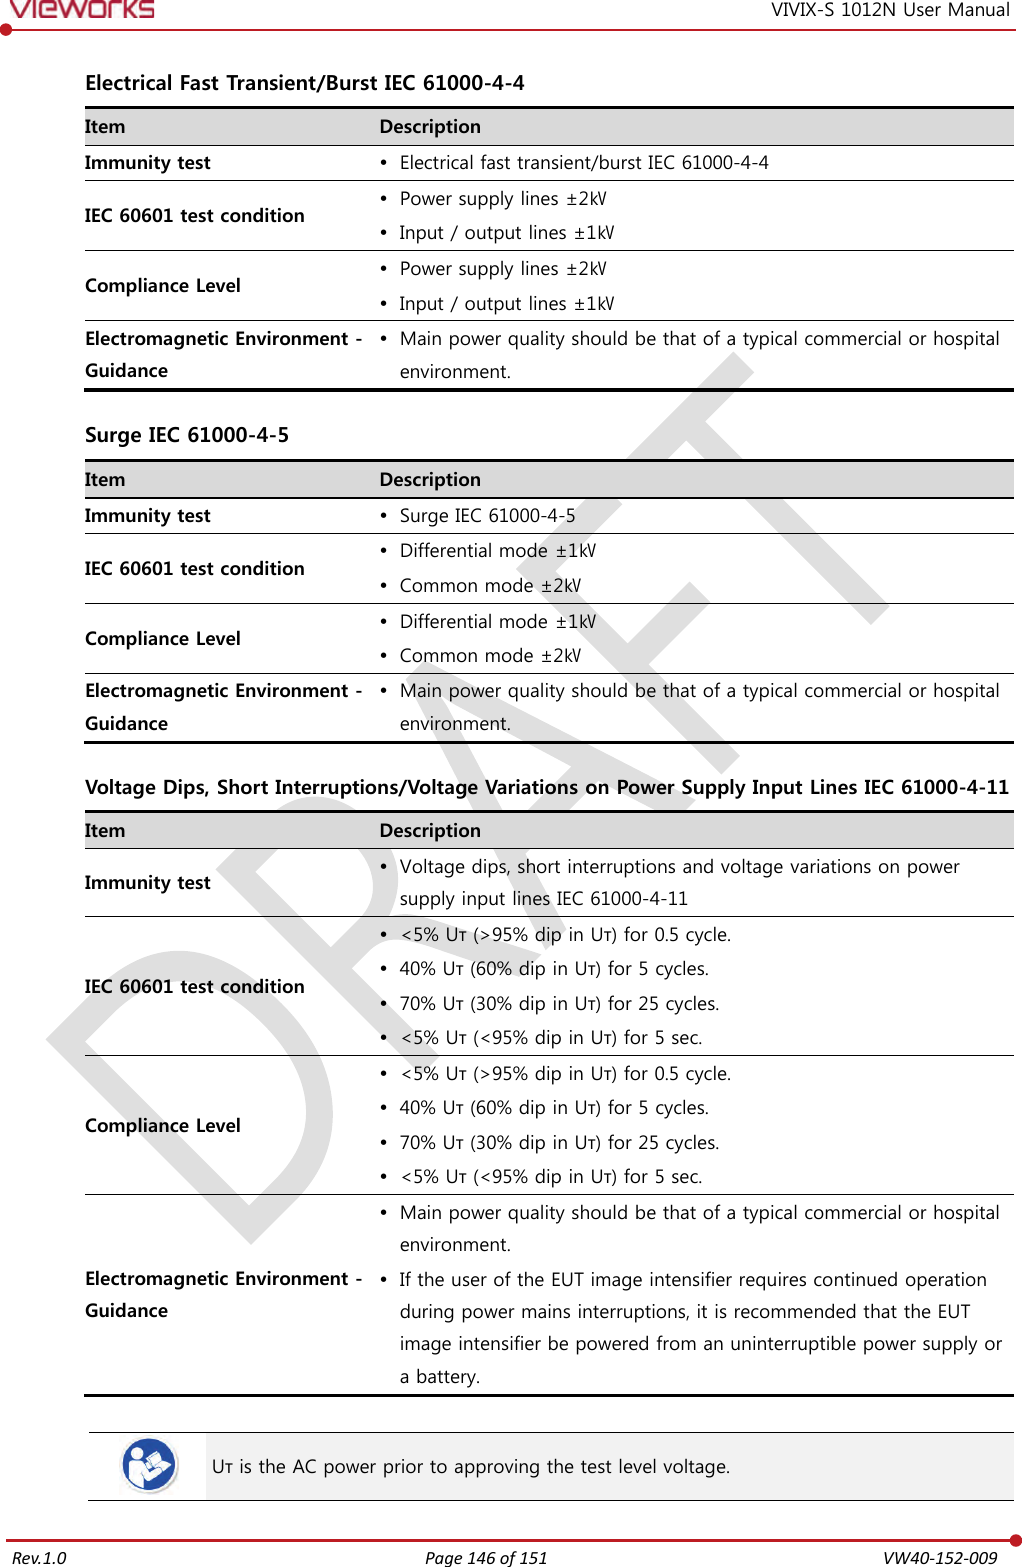   Rev.1.0 Page 146 of 151  VW40-152-009 VIVIX-S 1012N User Manual  Electrical Fast Transient/Burst IEC 61000-4-4 Item Description Immunity test  Electrical fast transient/burst IEC 61000-4-4 IEC 60601 test condition  Power supply lines ±2㎸  Input / output lines ±1㎸ Compliance Level  Power supply lines ±2㎸  Input / output lines ±1㎸ Electromagnetic Environment - Guidance  Main power quality should be that of a typical commercial or hospital environment.  Surge IEC 61000-4-5 Item Description Immunity test  Surge IEC 61000-4-5 IEC 60601 test condition  Differential mode ±1㎸  Common mode ±2㎸ Compliance Level  Differential mode ±1㎸  Common mode ±2㎸ Electromagnetic Environment - Guidance  Main power quality should be that of a typical commercial or hospital environment.  Voltage Dips, Short Interruptions/Voltage Variations on Power Supply Input Lines IEC 61000-4-11 Item Description Immunity test  Voltage dips, short interruptions and voltage variations on power supply input lines IEC 61000-4-11 IEC 60601 test condition  &lt;5% Uт (&gt;95% dip in Uт) for 0.5 cycle.  40% Uт (60% dip in Uт) for 5 cycles.  70% Uт (30% dip in Uт) for 25 cycles.  &lt;5% Uт (&lt;95% dip in Uт) for 5 sec. Compliance Level  &lt;5% Uт (&gt;95% dip in Uт) for 0.5 cycle.  40% Uт (60% dip in Uт) for 5 cycles.  70% Uт (30% dip in Uт) for 25 cycles.  &lt;5% Uт (&lt;95% dip in Uт) for 5 sec. Electromagnetic Environment - Guidance  Main power quality should be that of a typical commercial or hospital environment.  If the user of the EUT image intensifier requires continued operation during power mains interruptions, it is recommended that the EUT image intensifier be powered from an uninterruptible power supply or a battery.   Uт is the AC power prior to approving the test level voltage. 